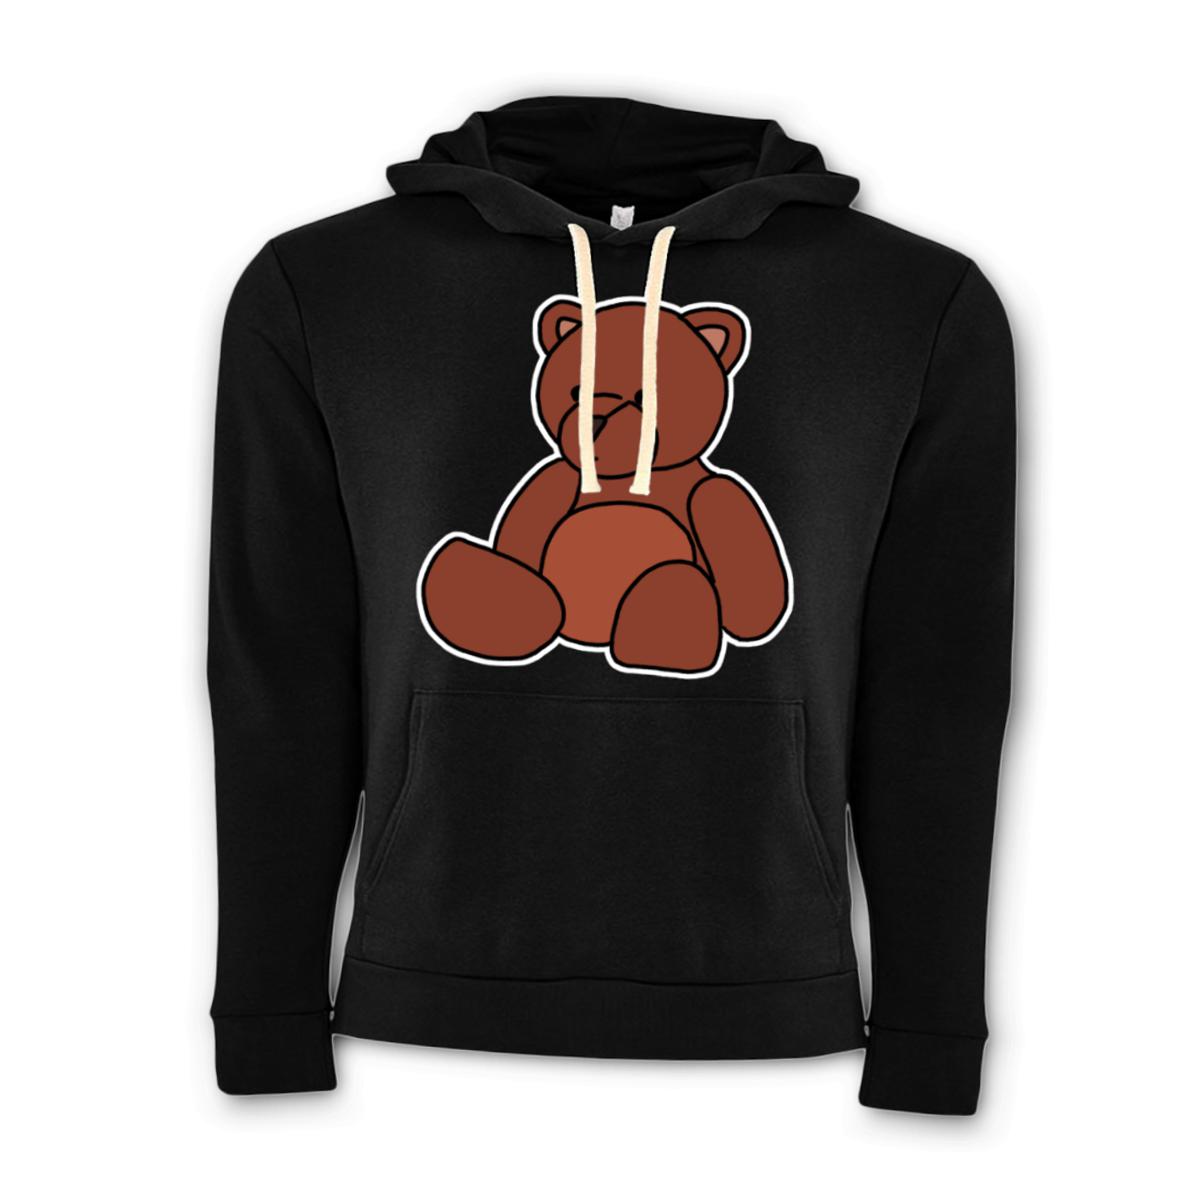 Toy Bear Unisex Pullover Hoodie Small black